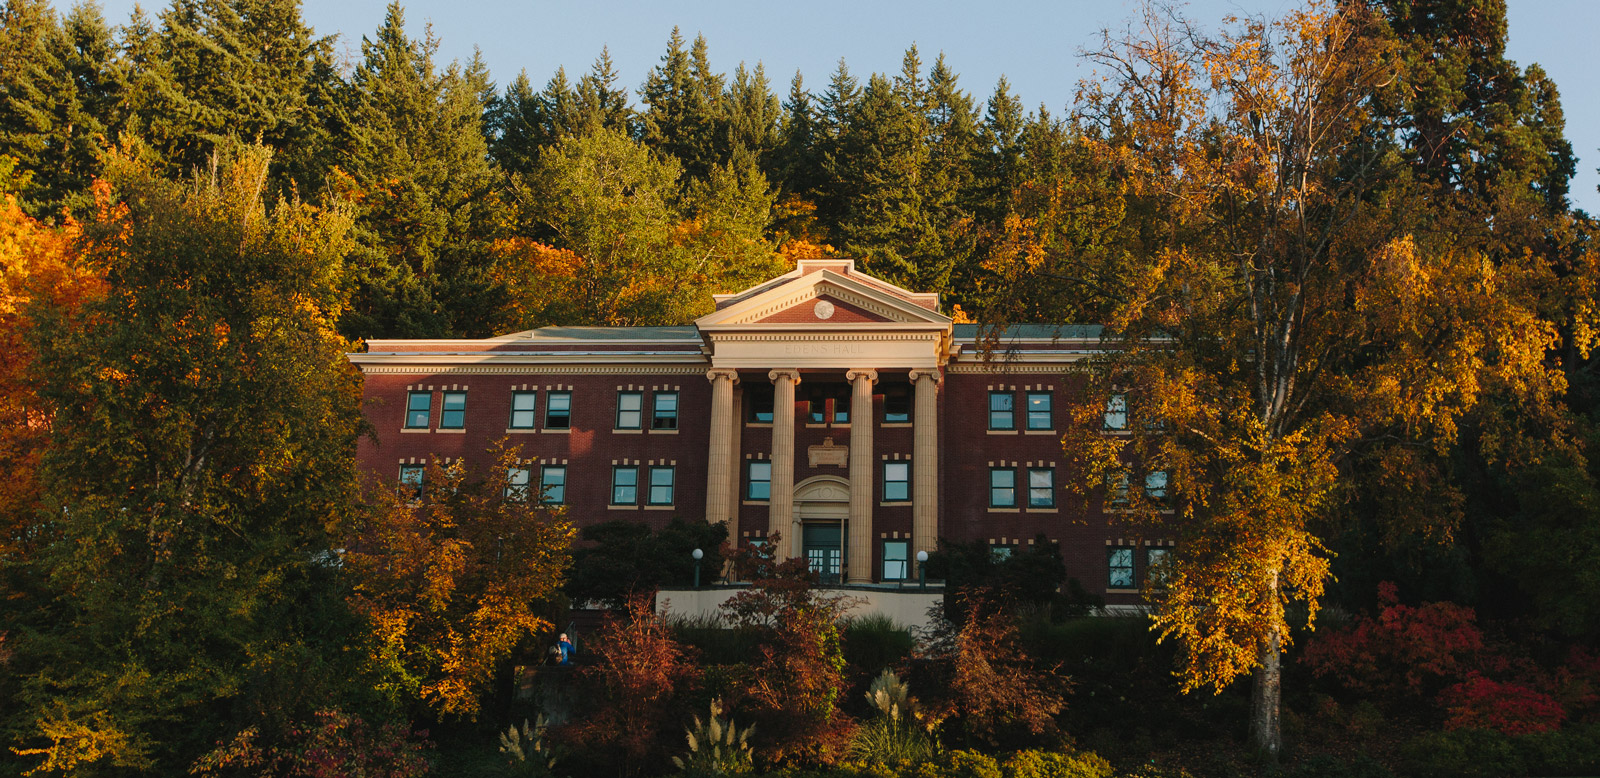 Edens Hall in the fall time, surrounded by trees